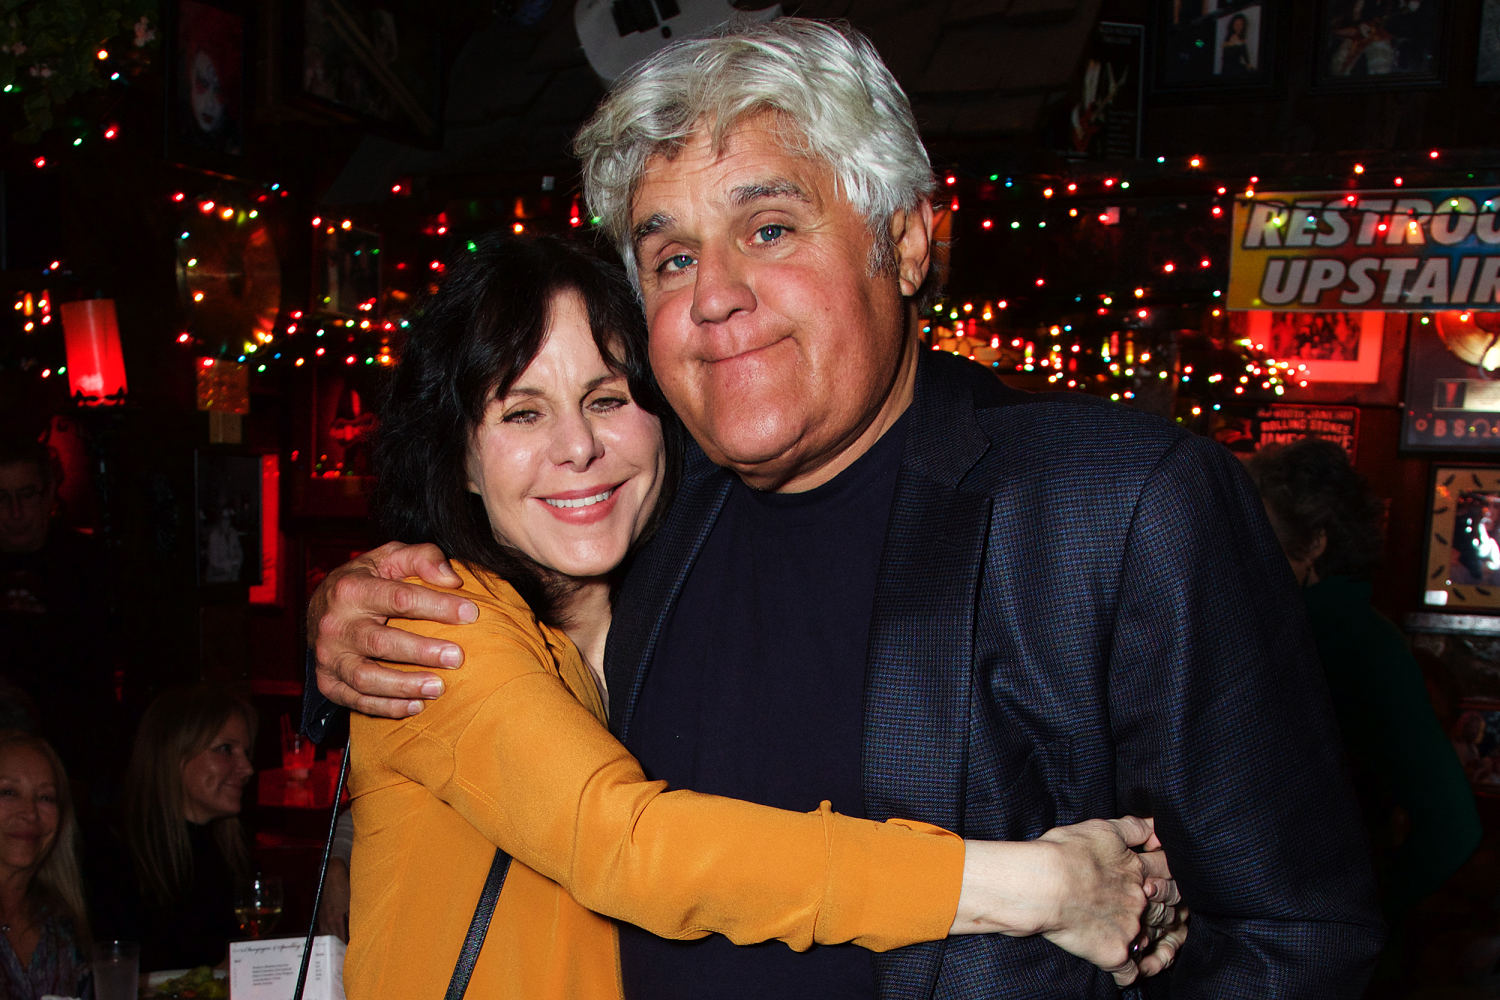 Jay Leno's wife 'sometimes does not know her husband' after dementia diagnosis, court docs say